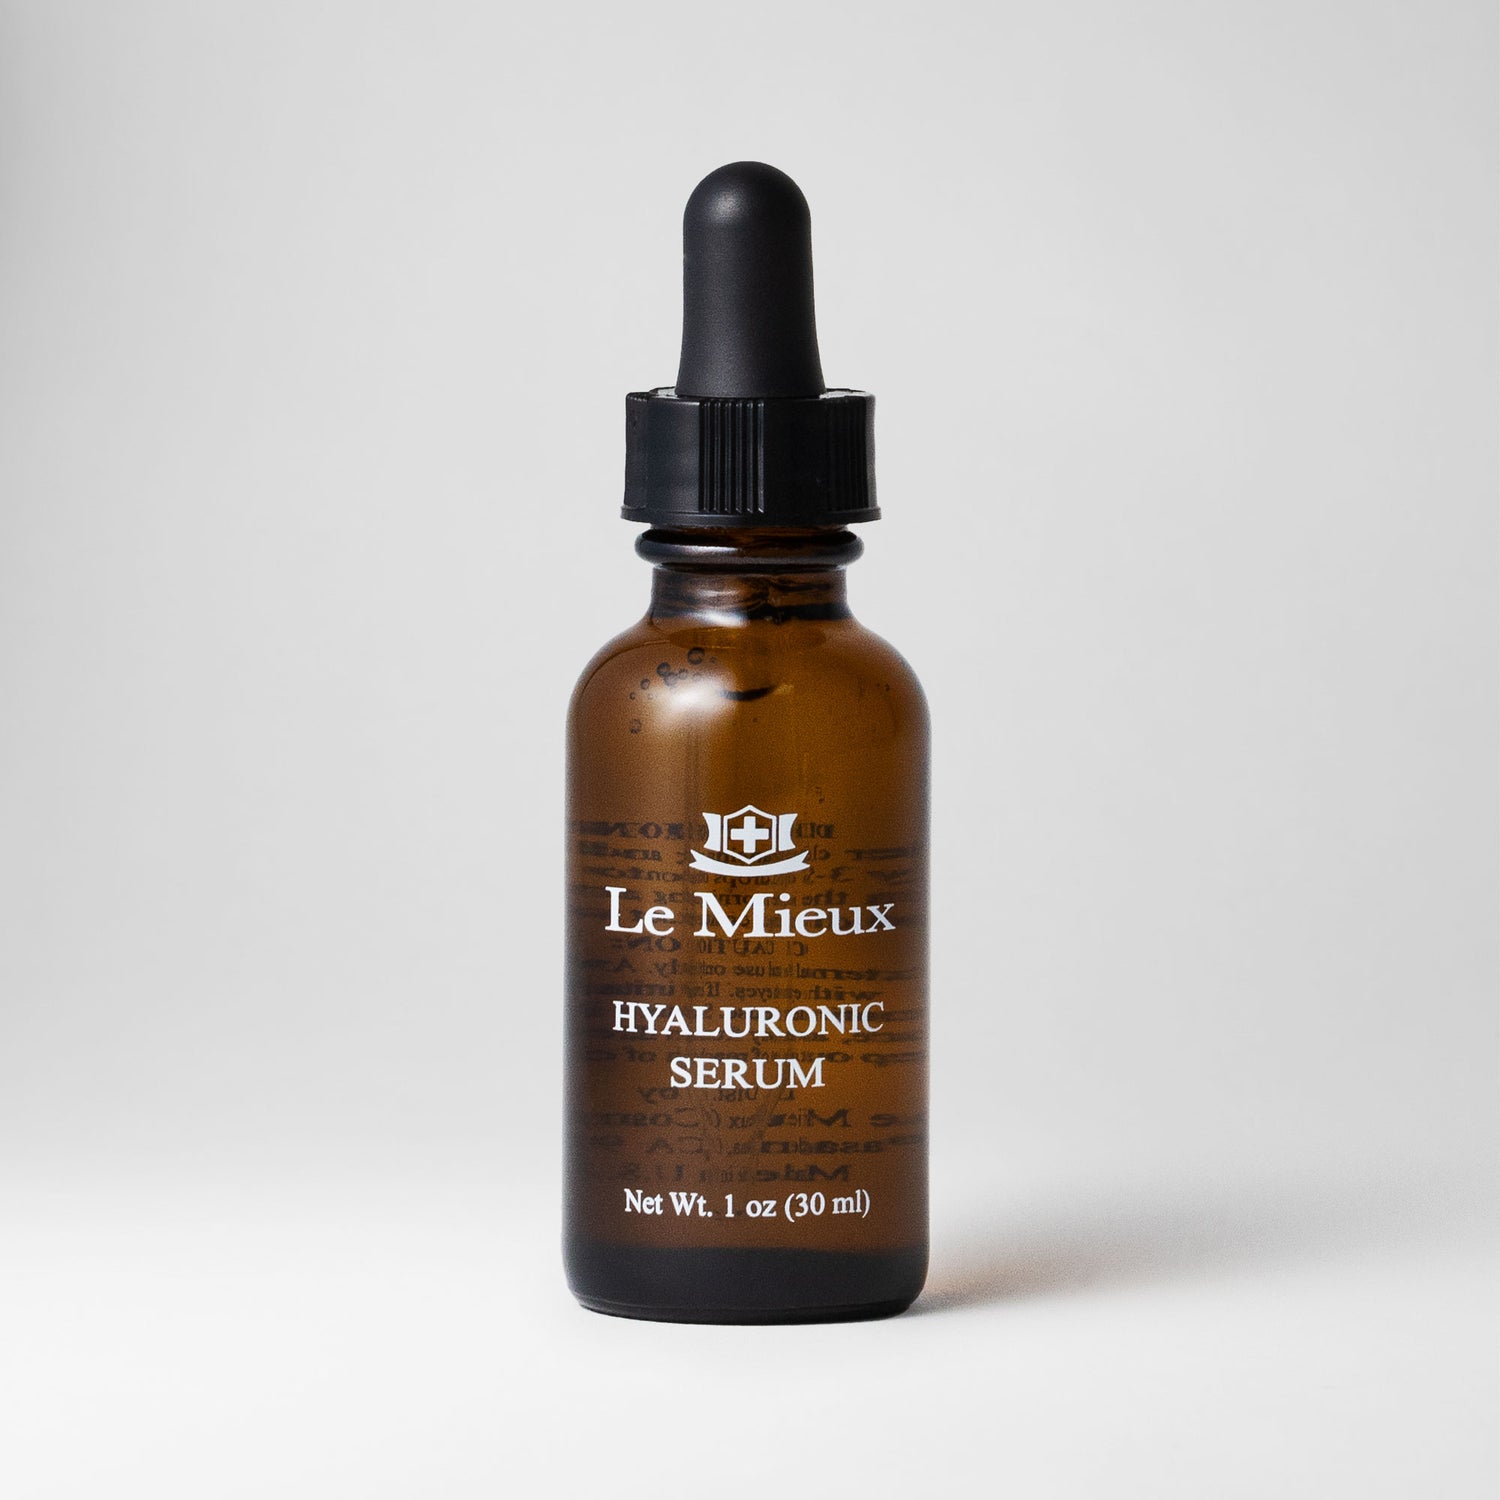  HYALURONIC SERUM from Le Mieux Skincare - featured